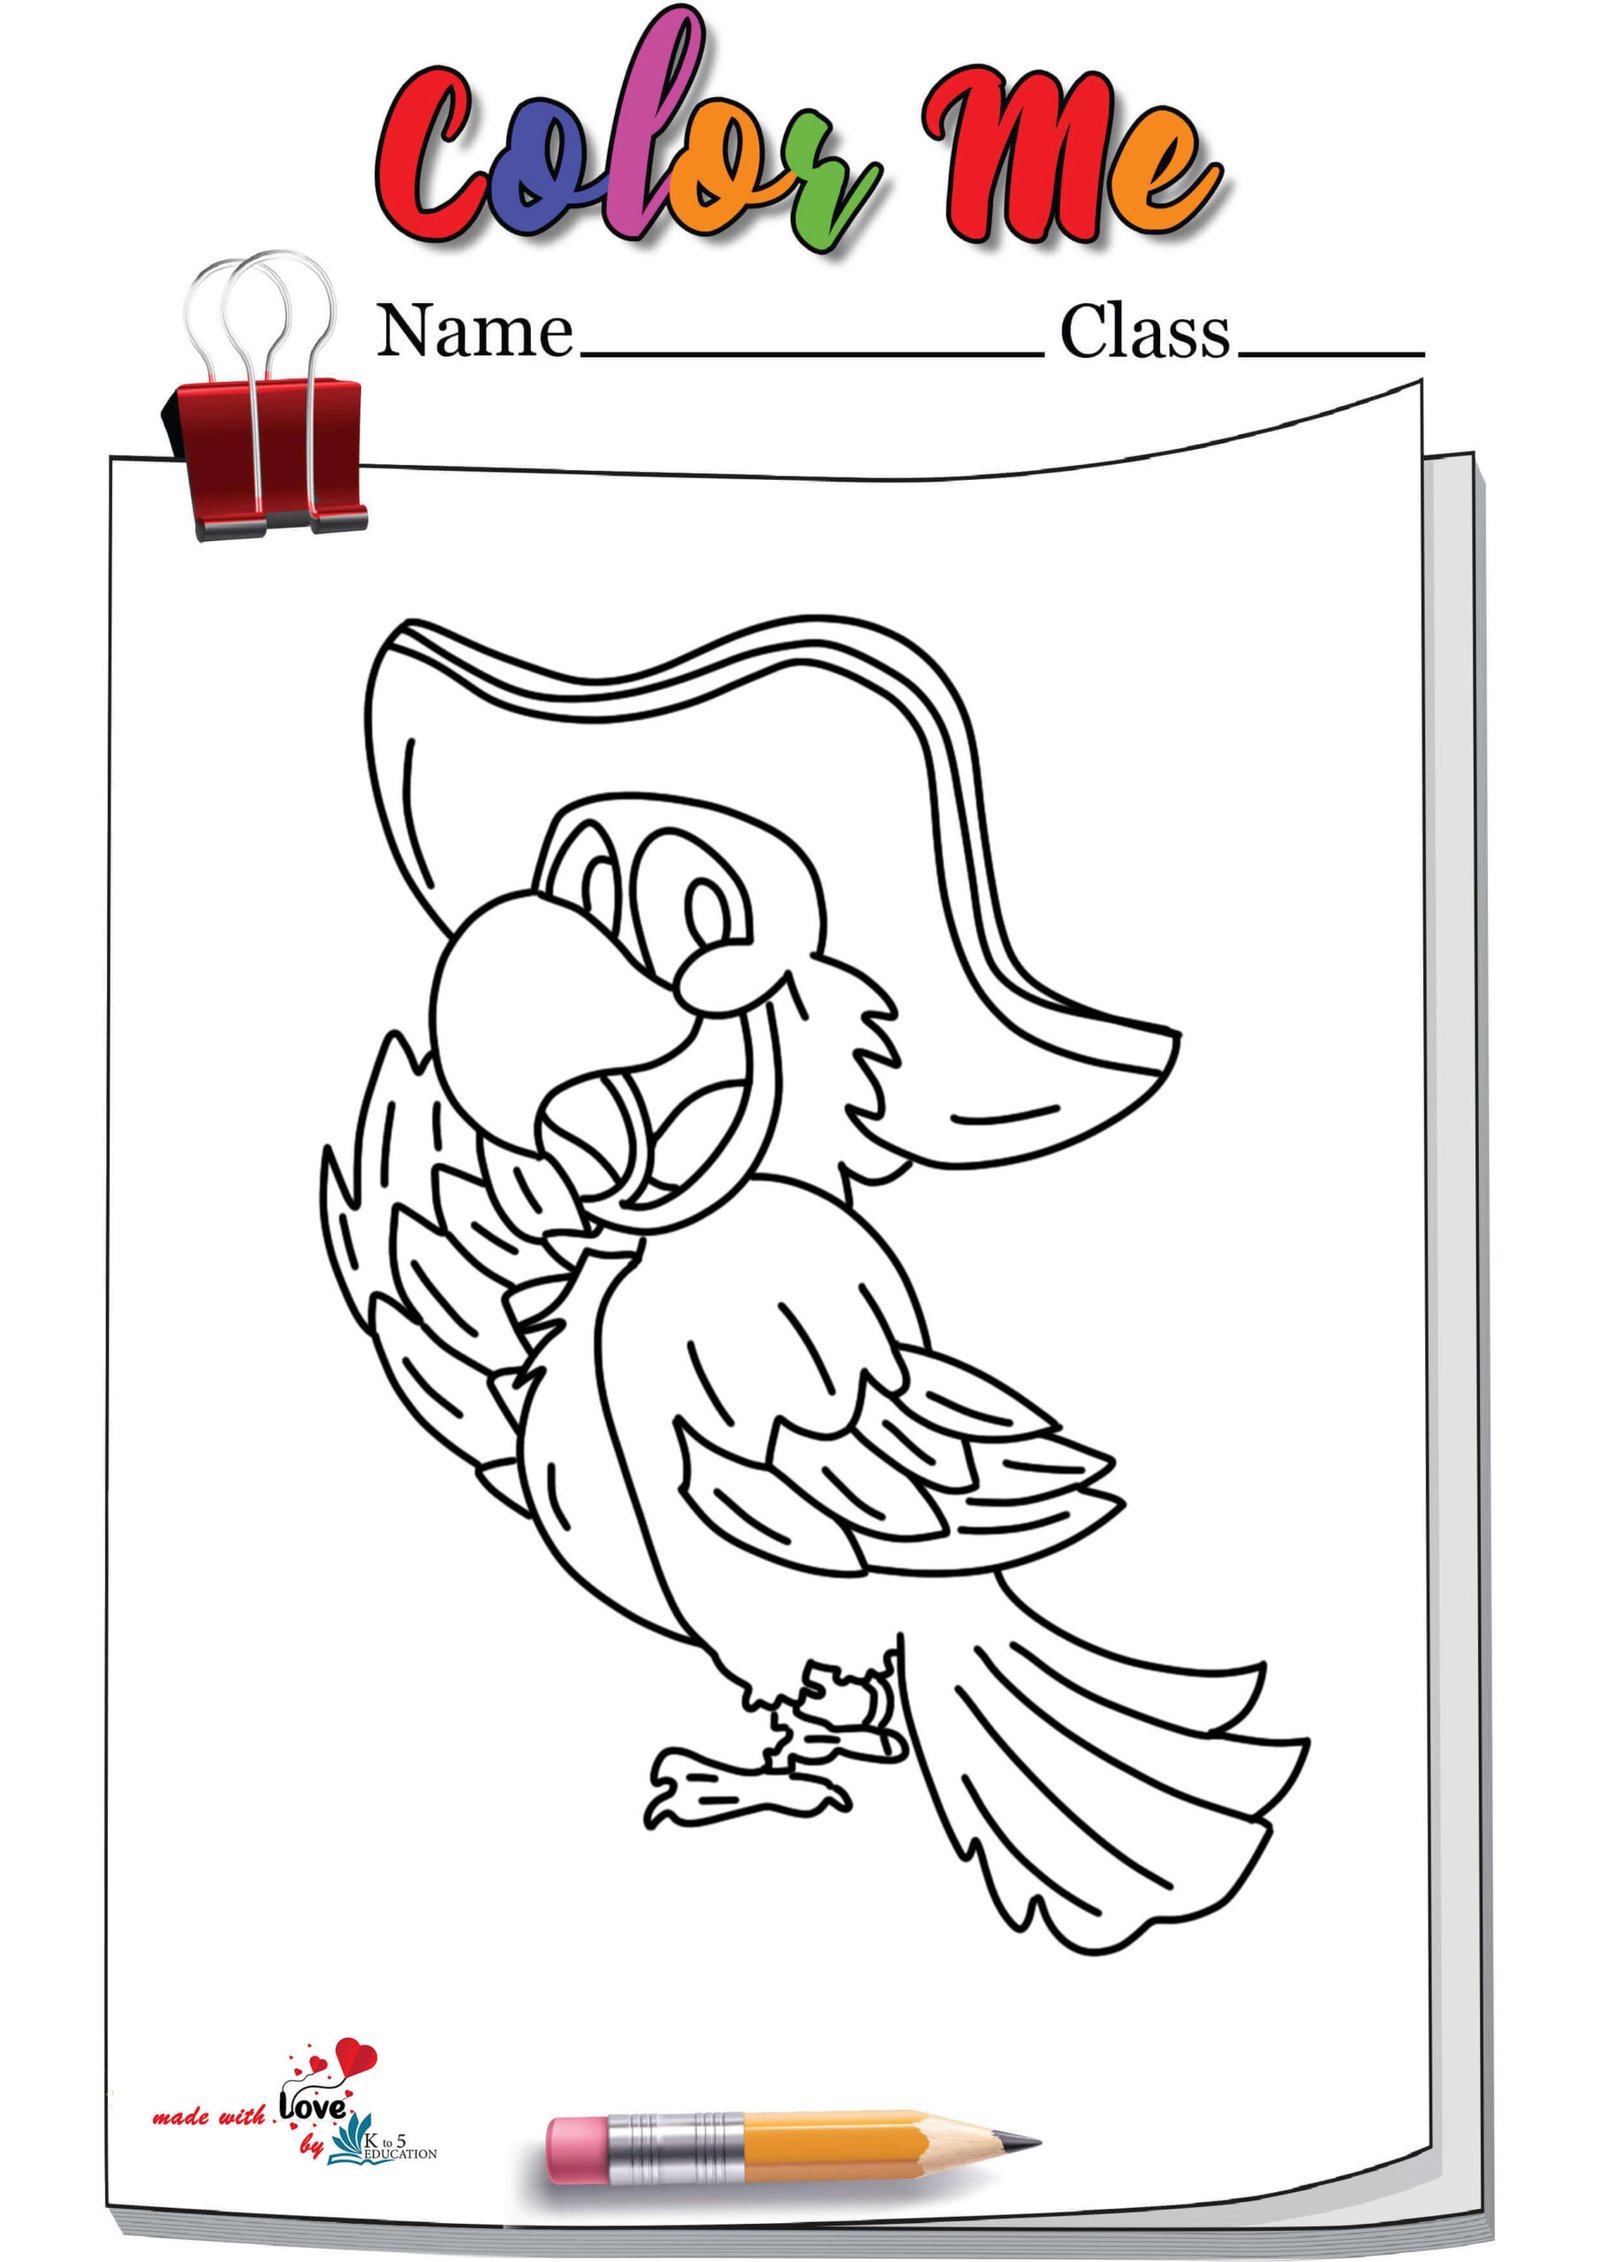 Pirate Parrot Coloring Page